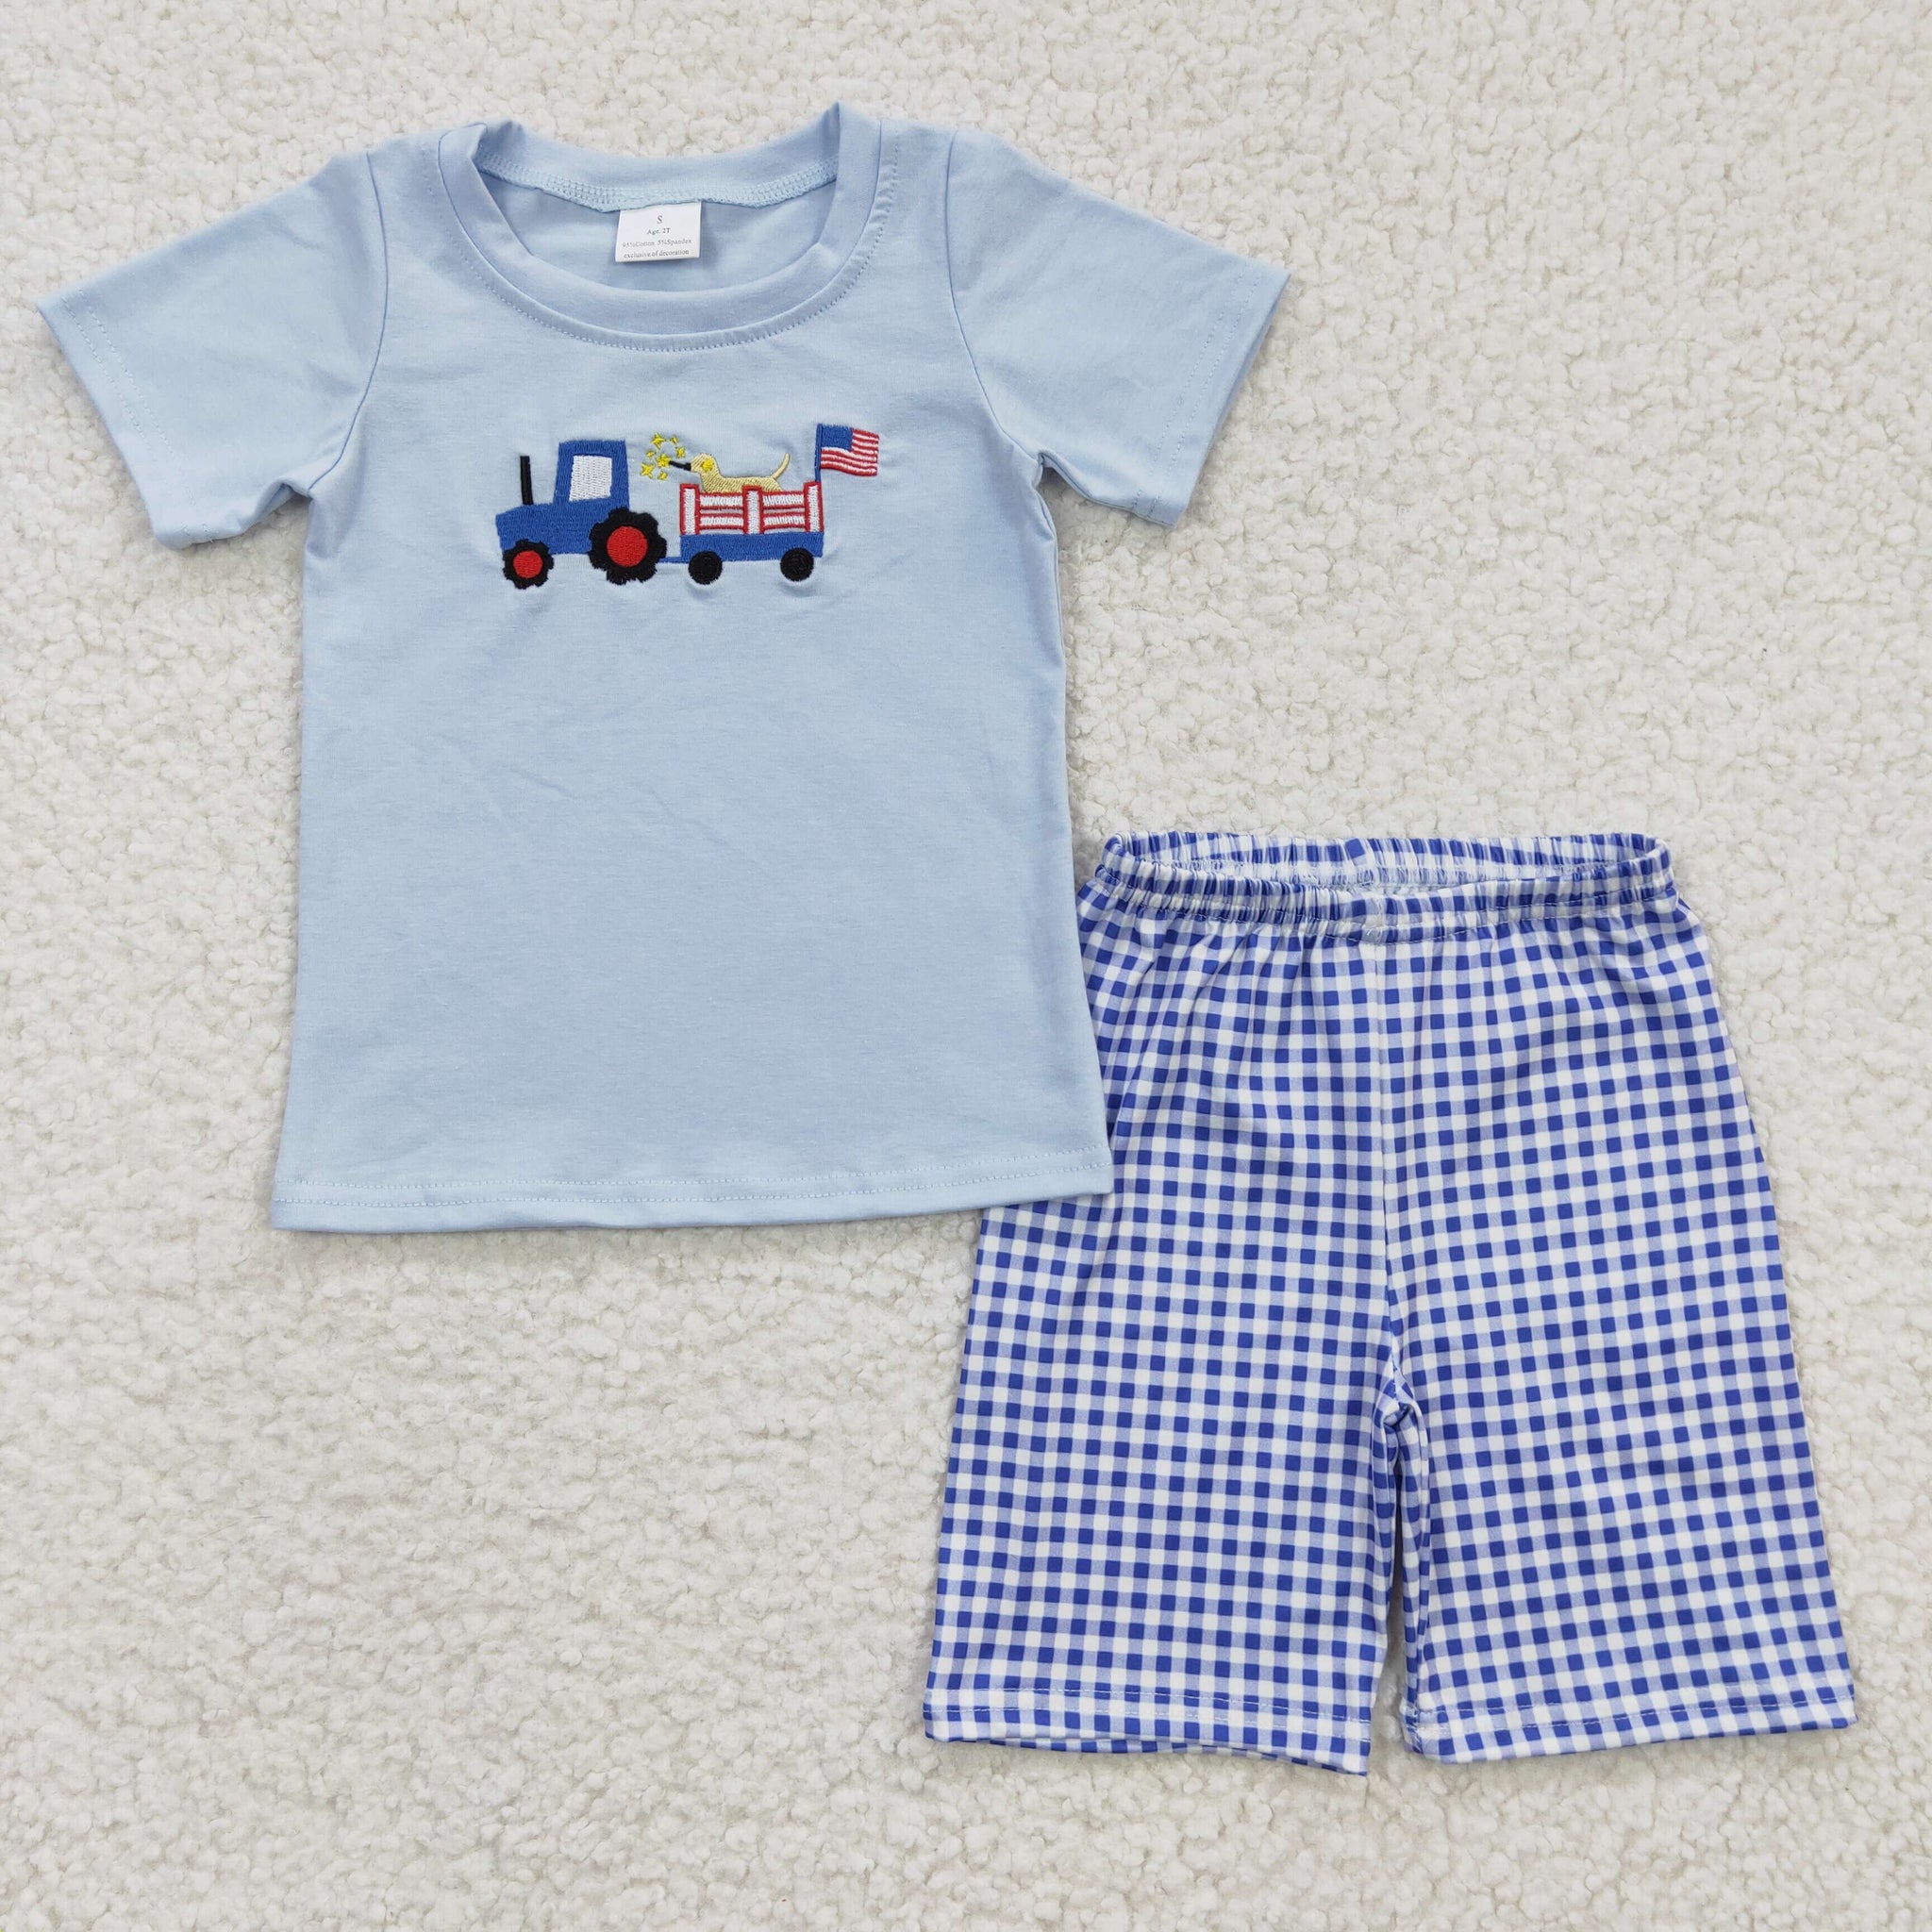 BSSO0195 baby boy clothes blue  4th of july patriotic outfit embroidery flag truck set